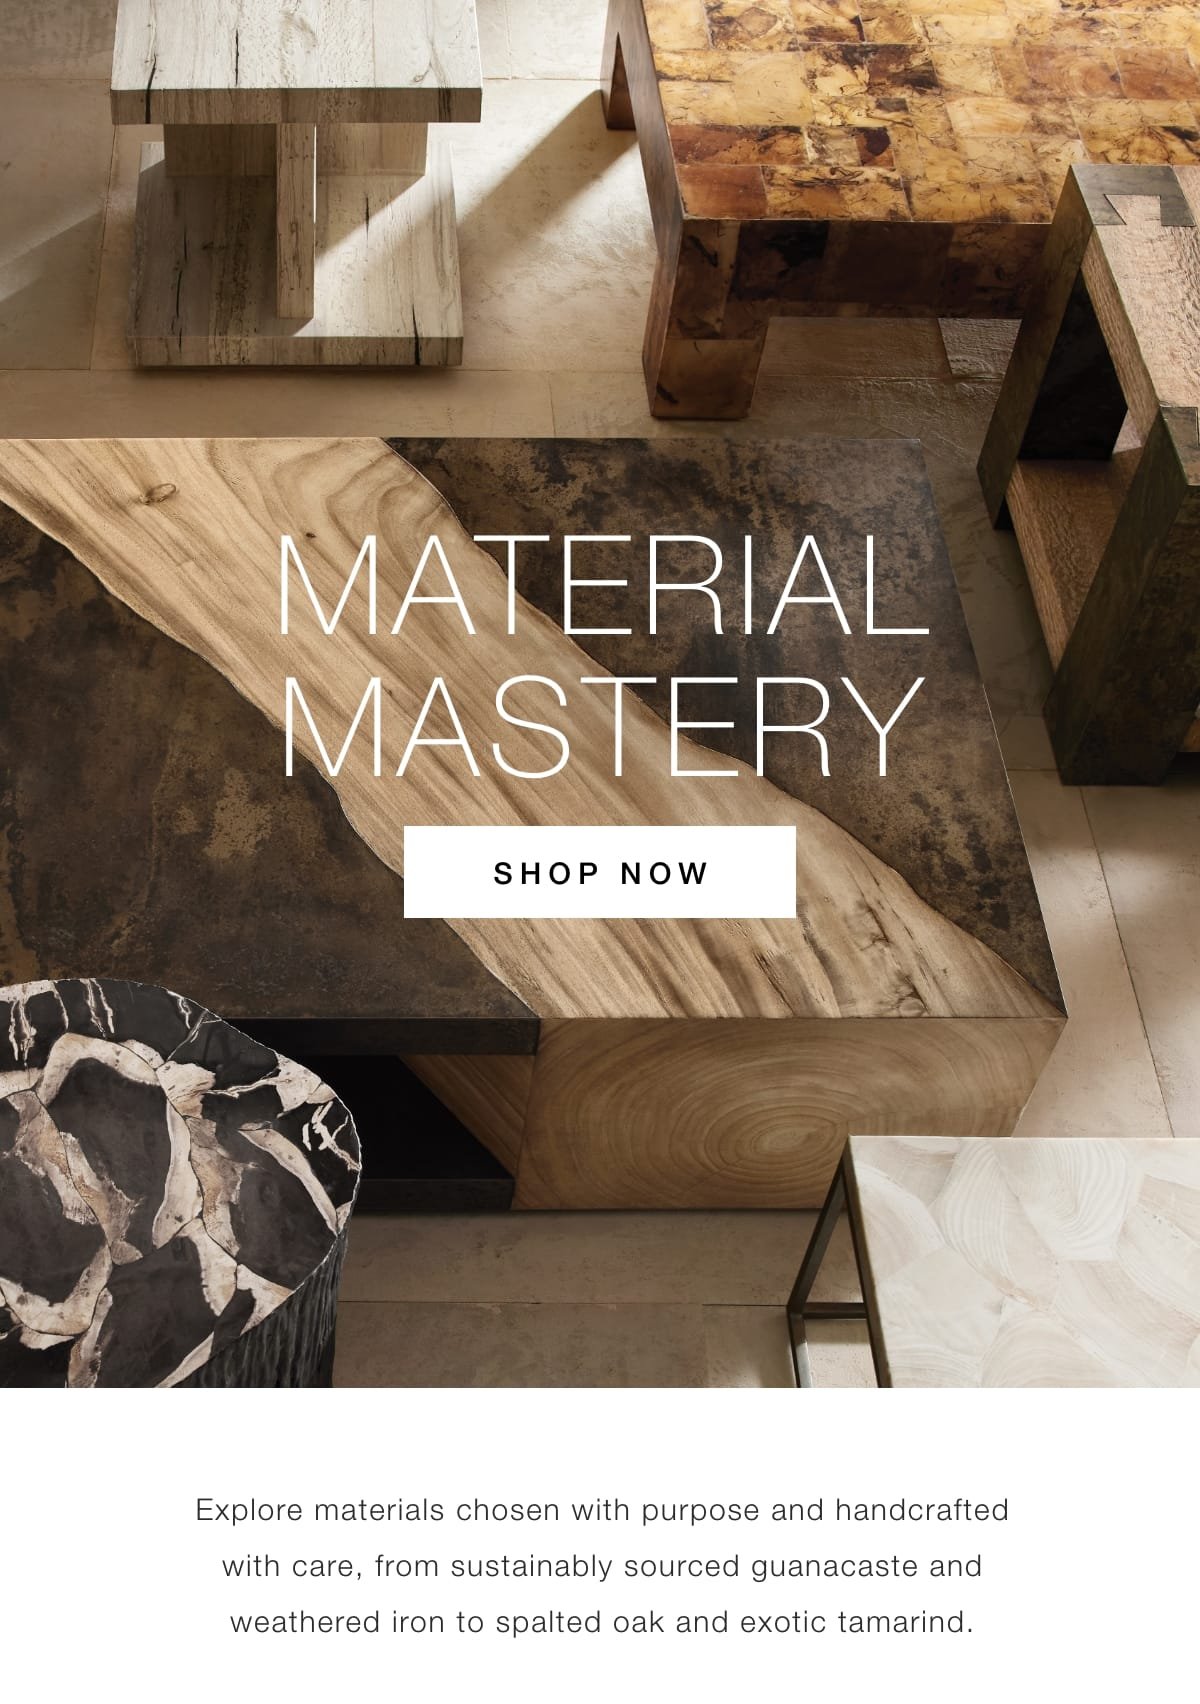 Material Mastery